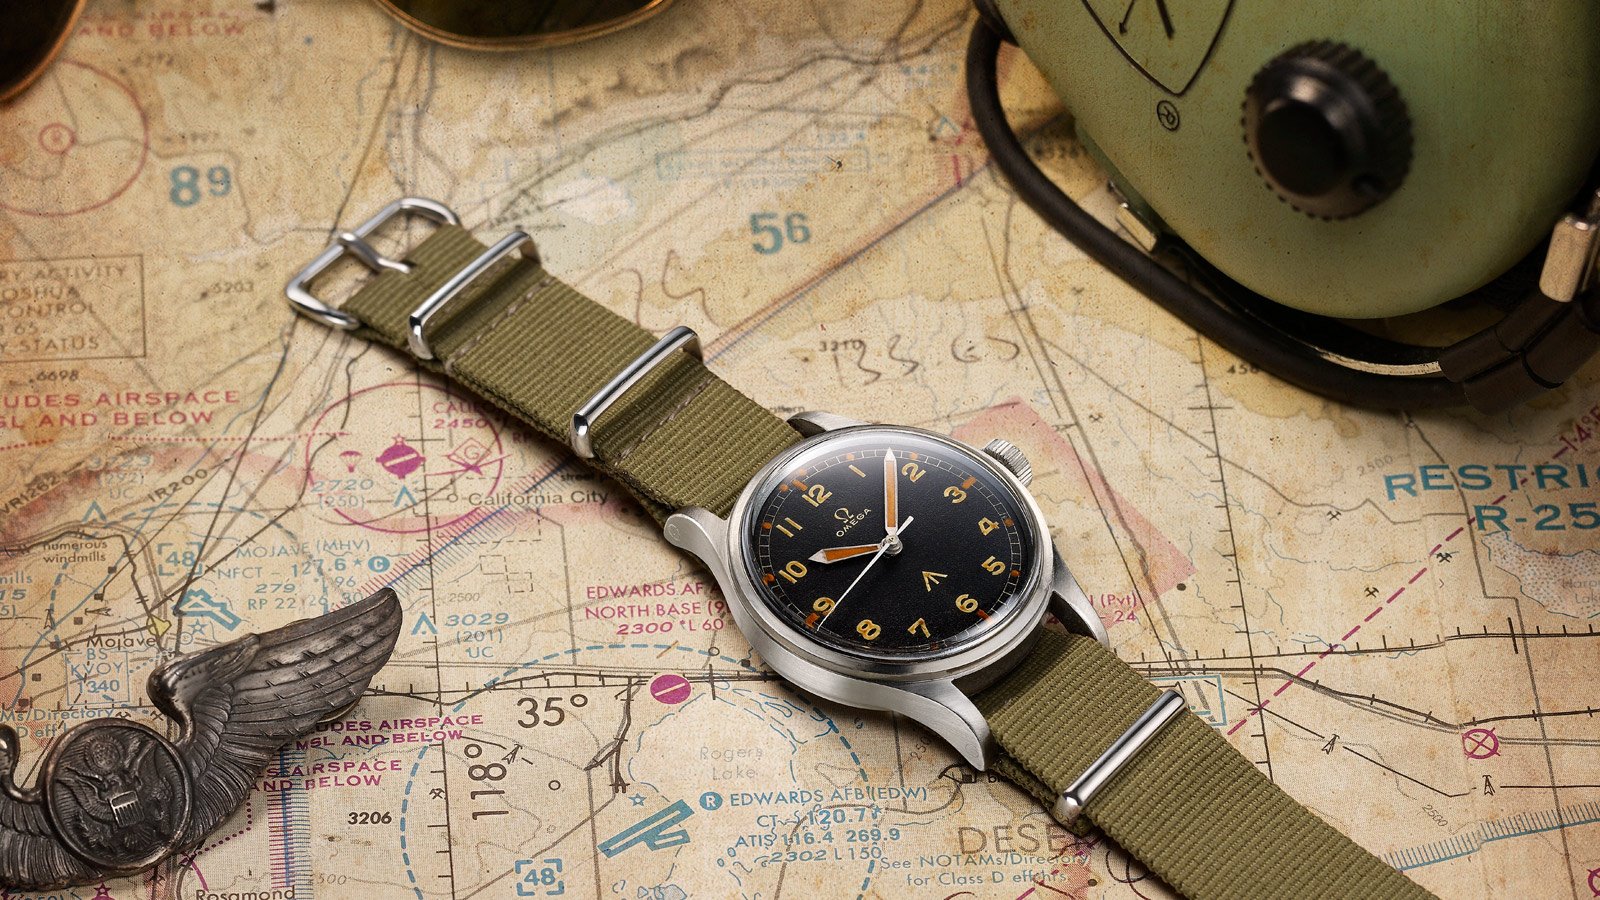 A NATO strap is an easy way to add a different dimension to your Rolex